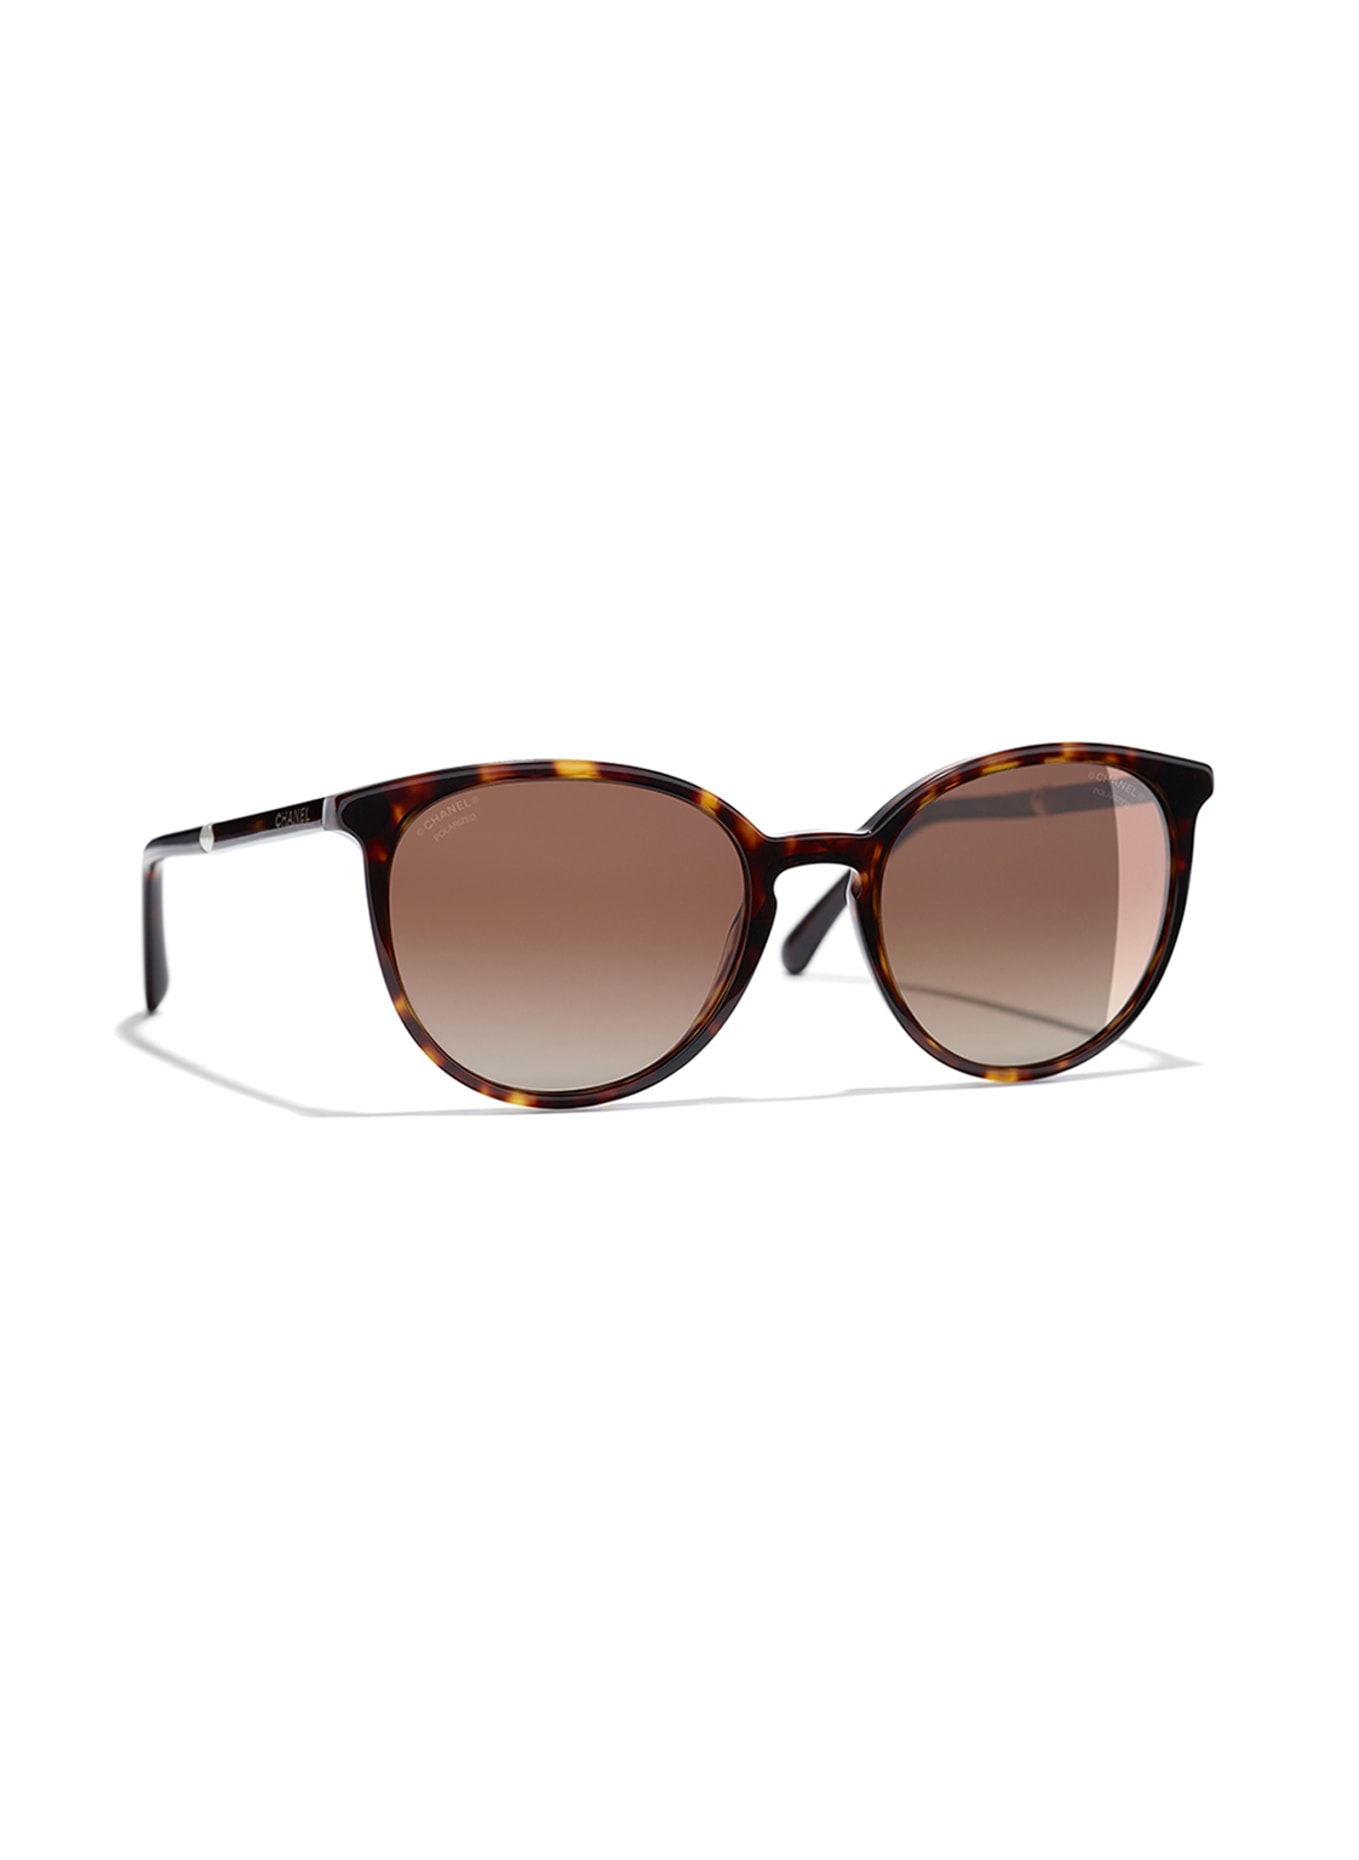 CHANEL Butterfly sunglasses, Color: C714S9 - HAVANA/BROWN (Image 1)